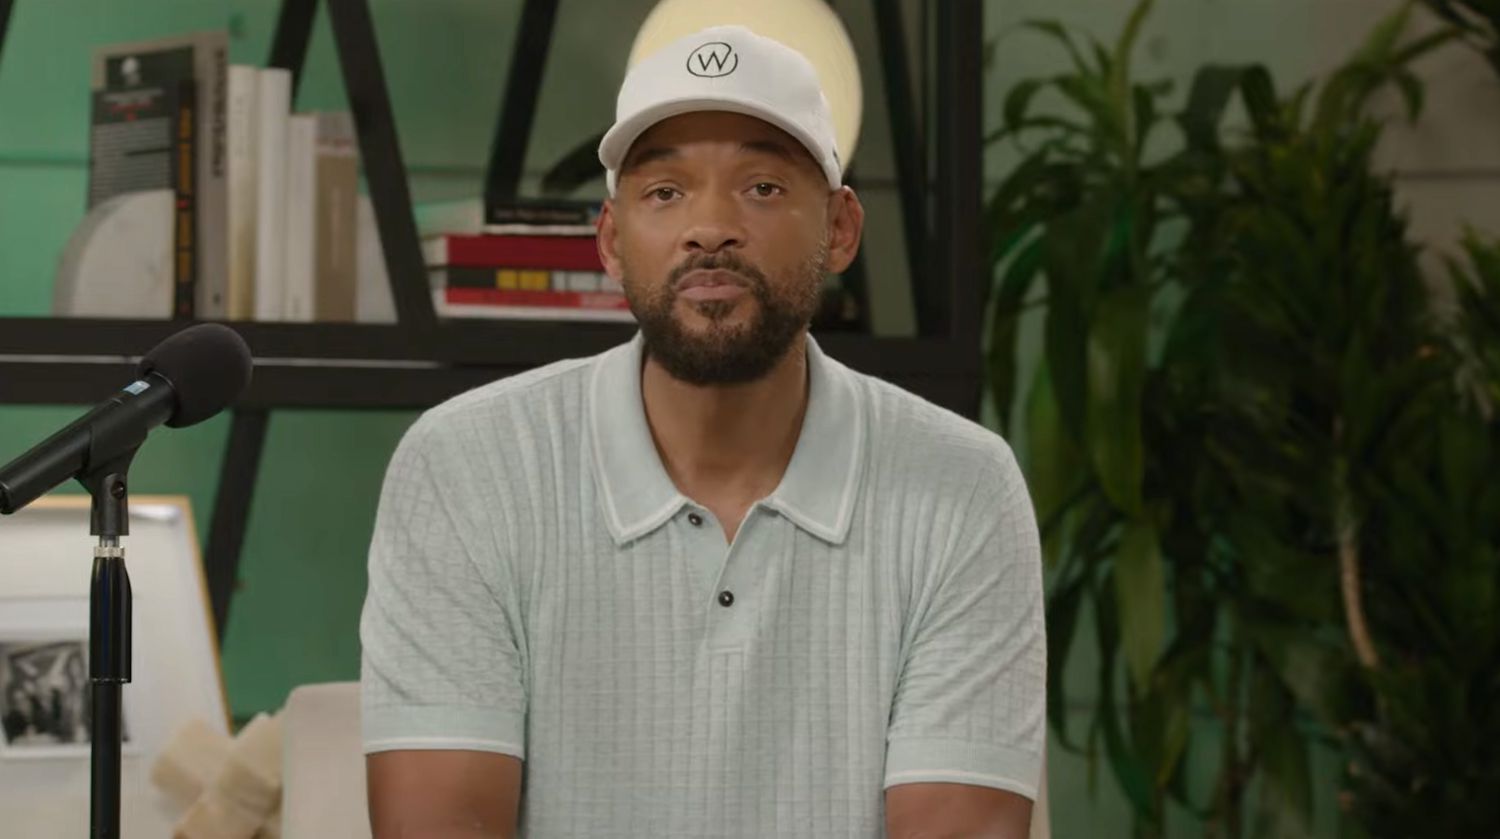 Will Smith Apologizes to Chris Rock in New Video: 'I'm Here Whenever You're Ready to Talk'